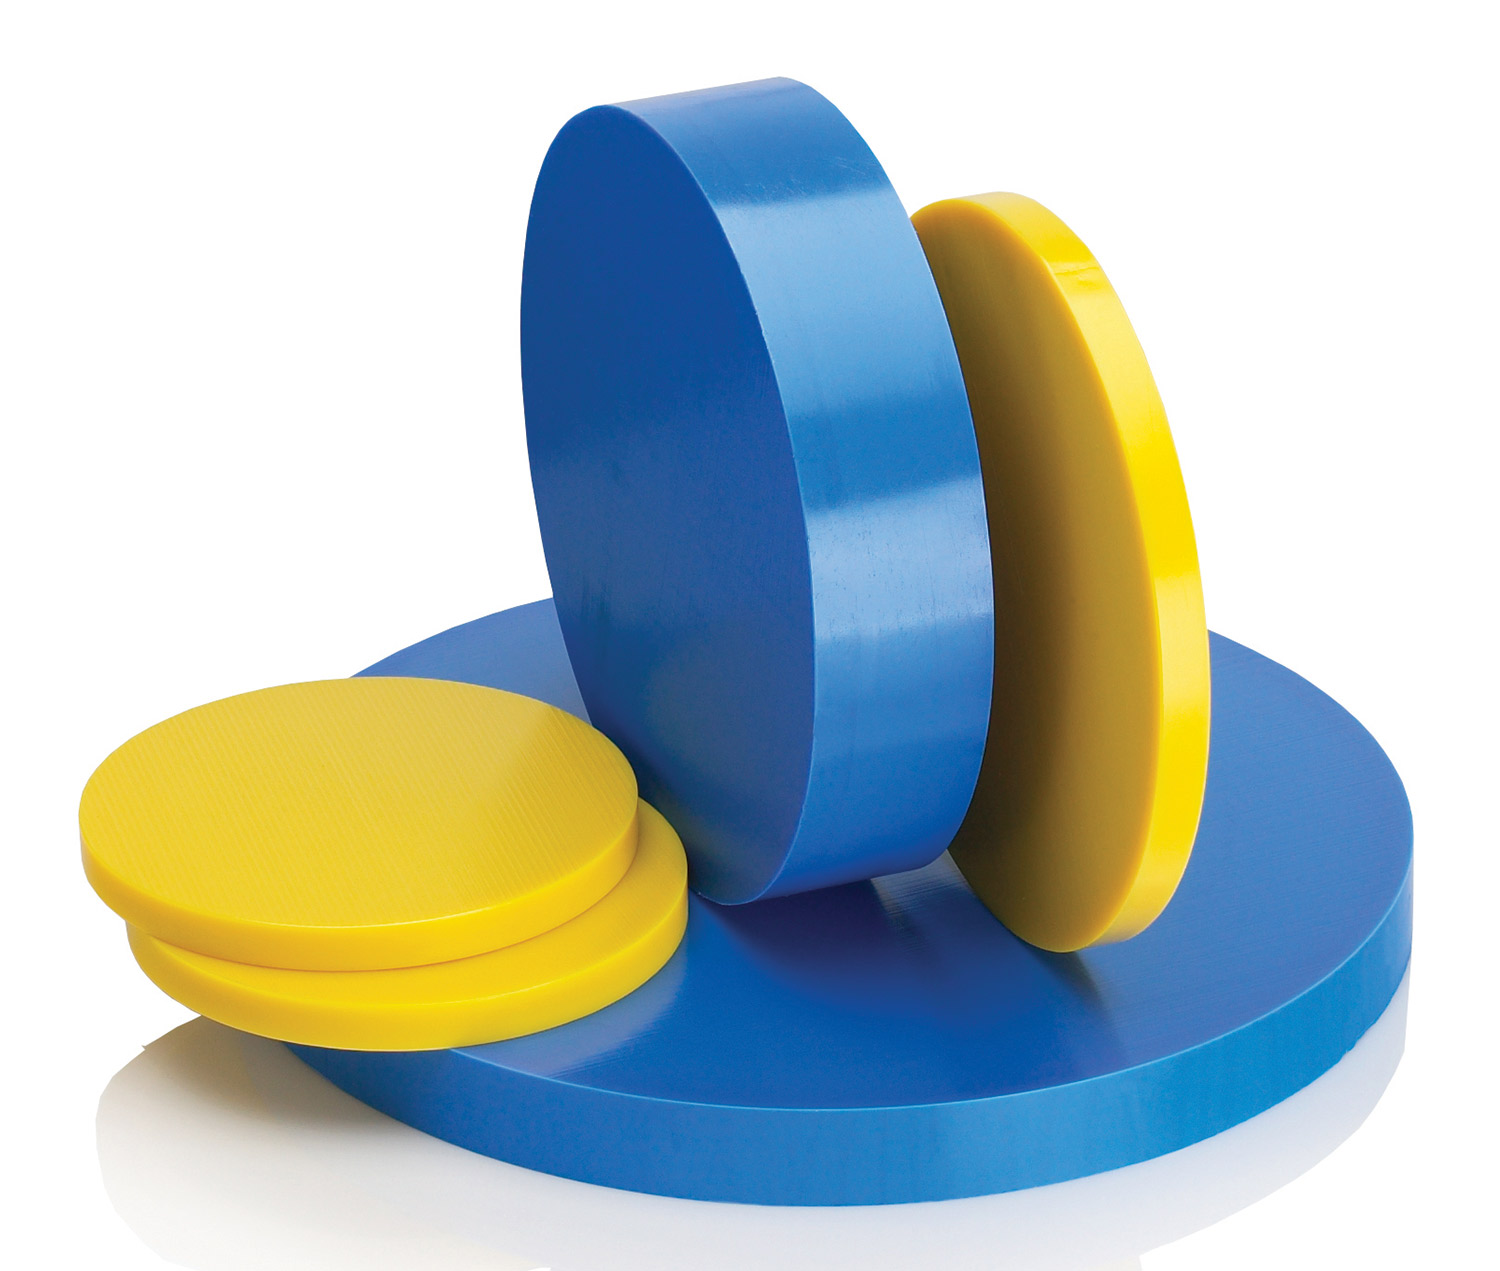 NYCAST® cushion pads in yellow and light blue